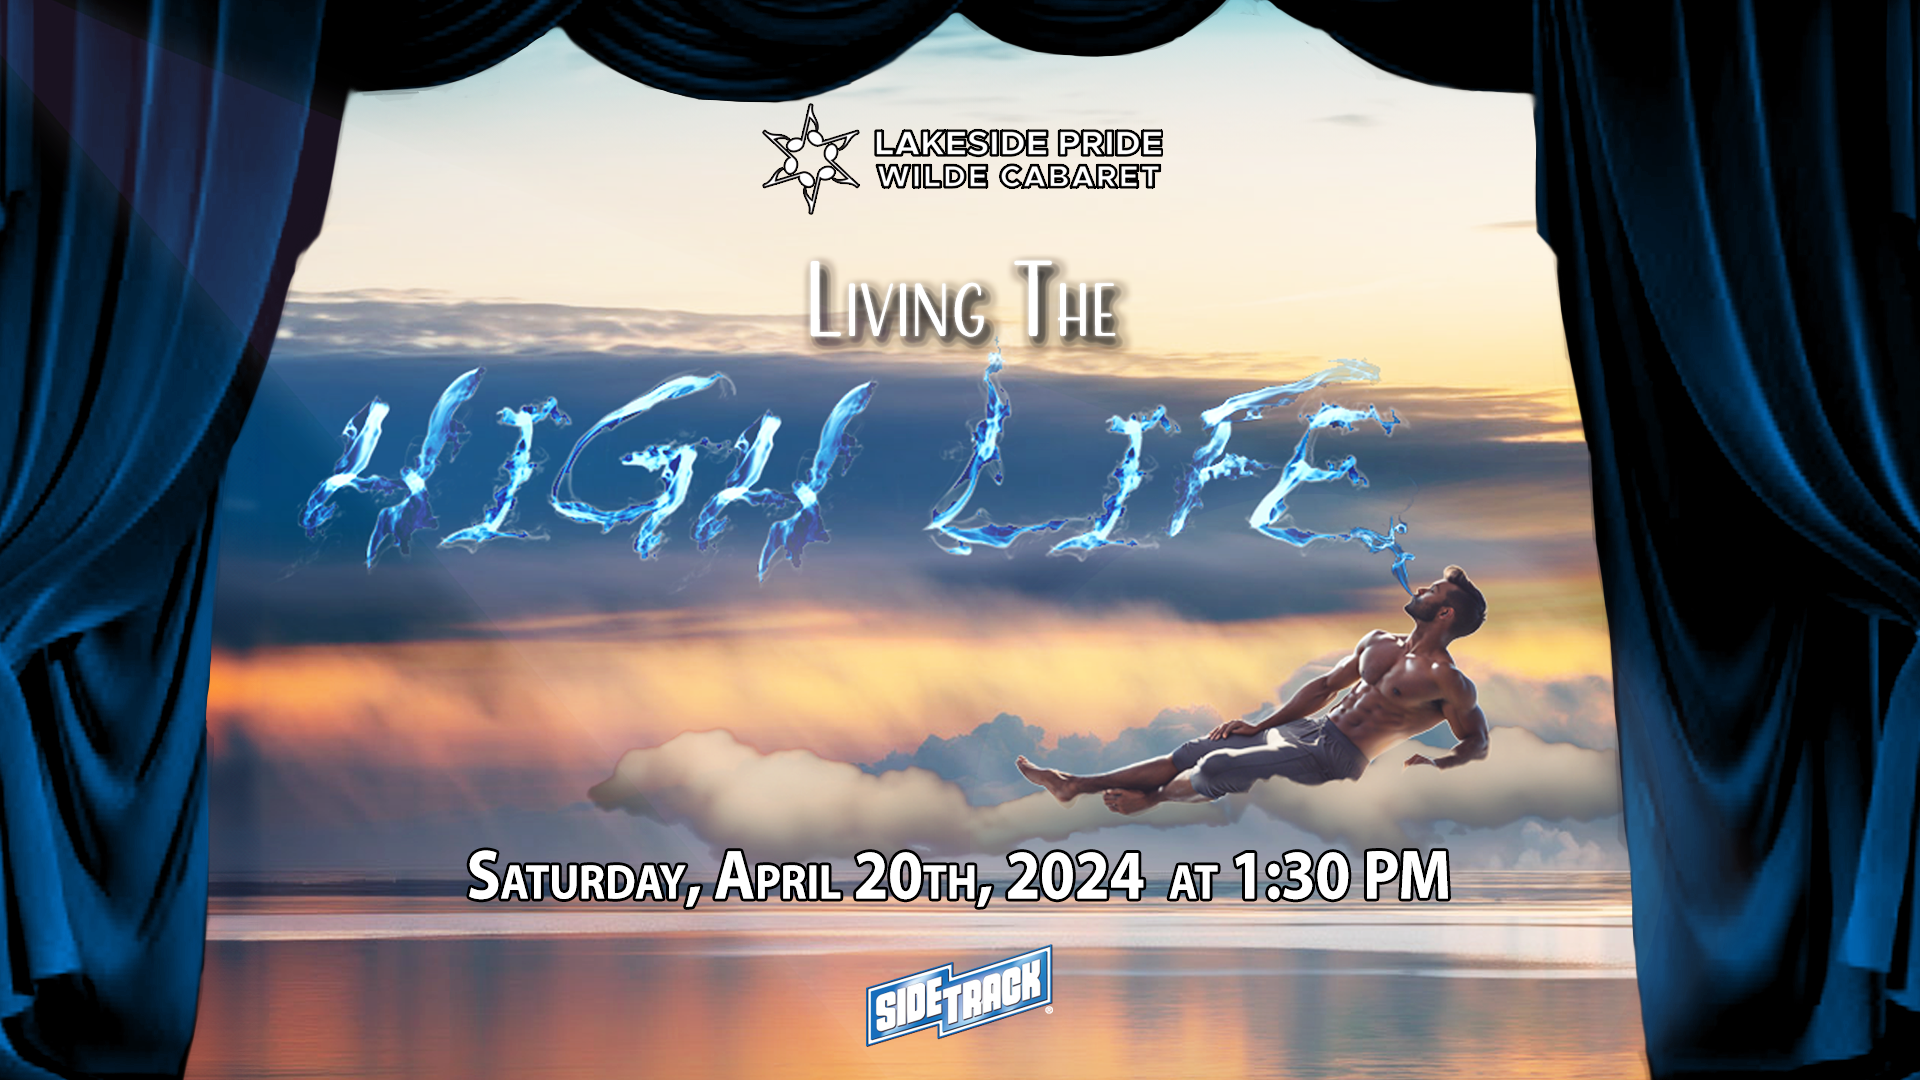 Lakeside Pride Wilde Cabaret Sings Living the High Life, Saturday April 20th, 2024, 1:30 PM, at Sidetrack